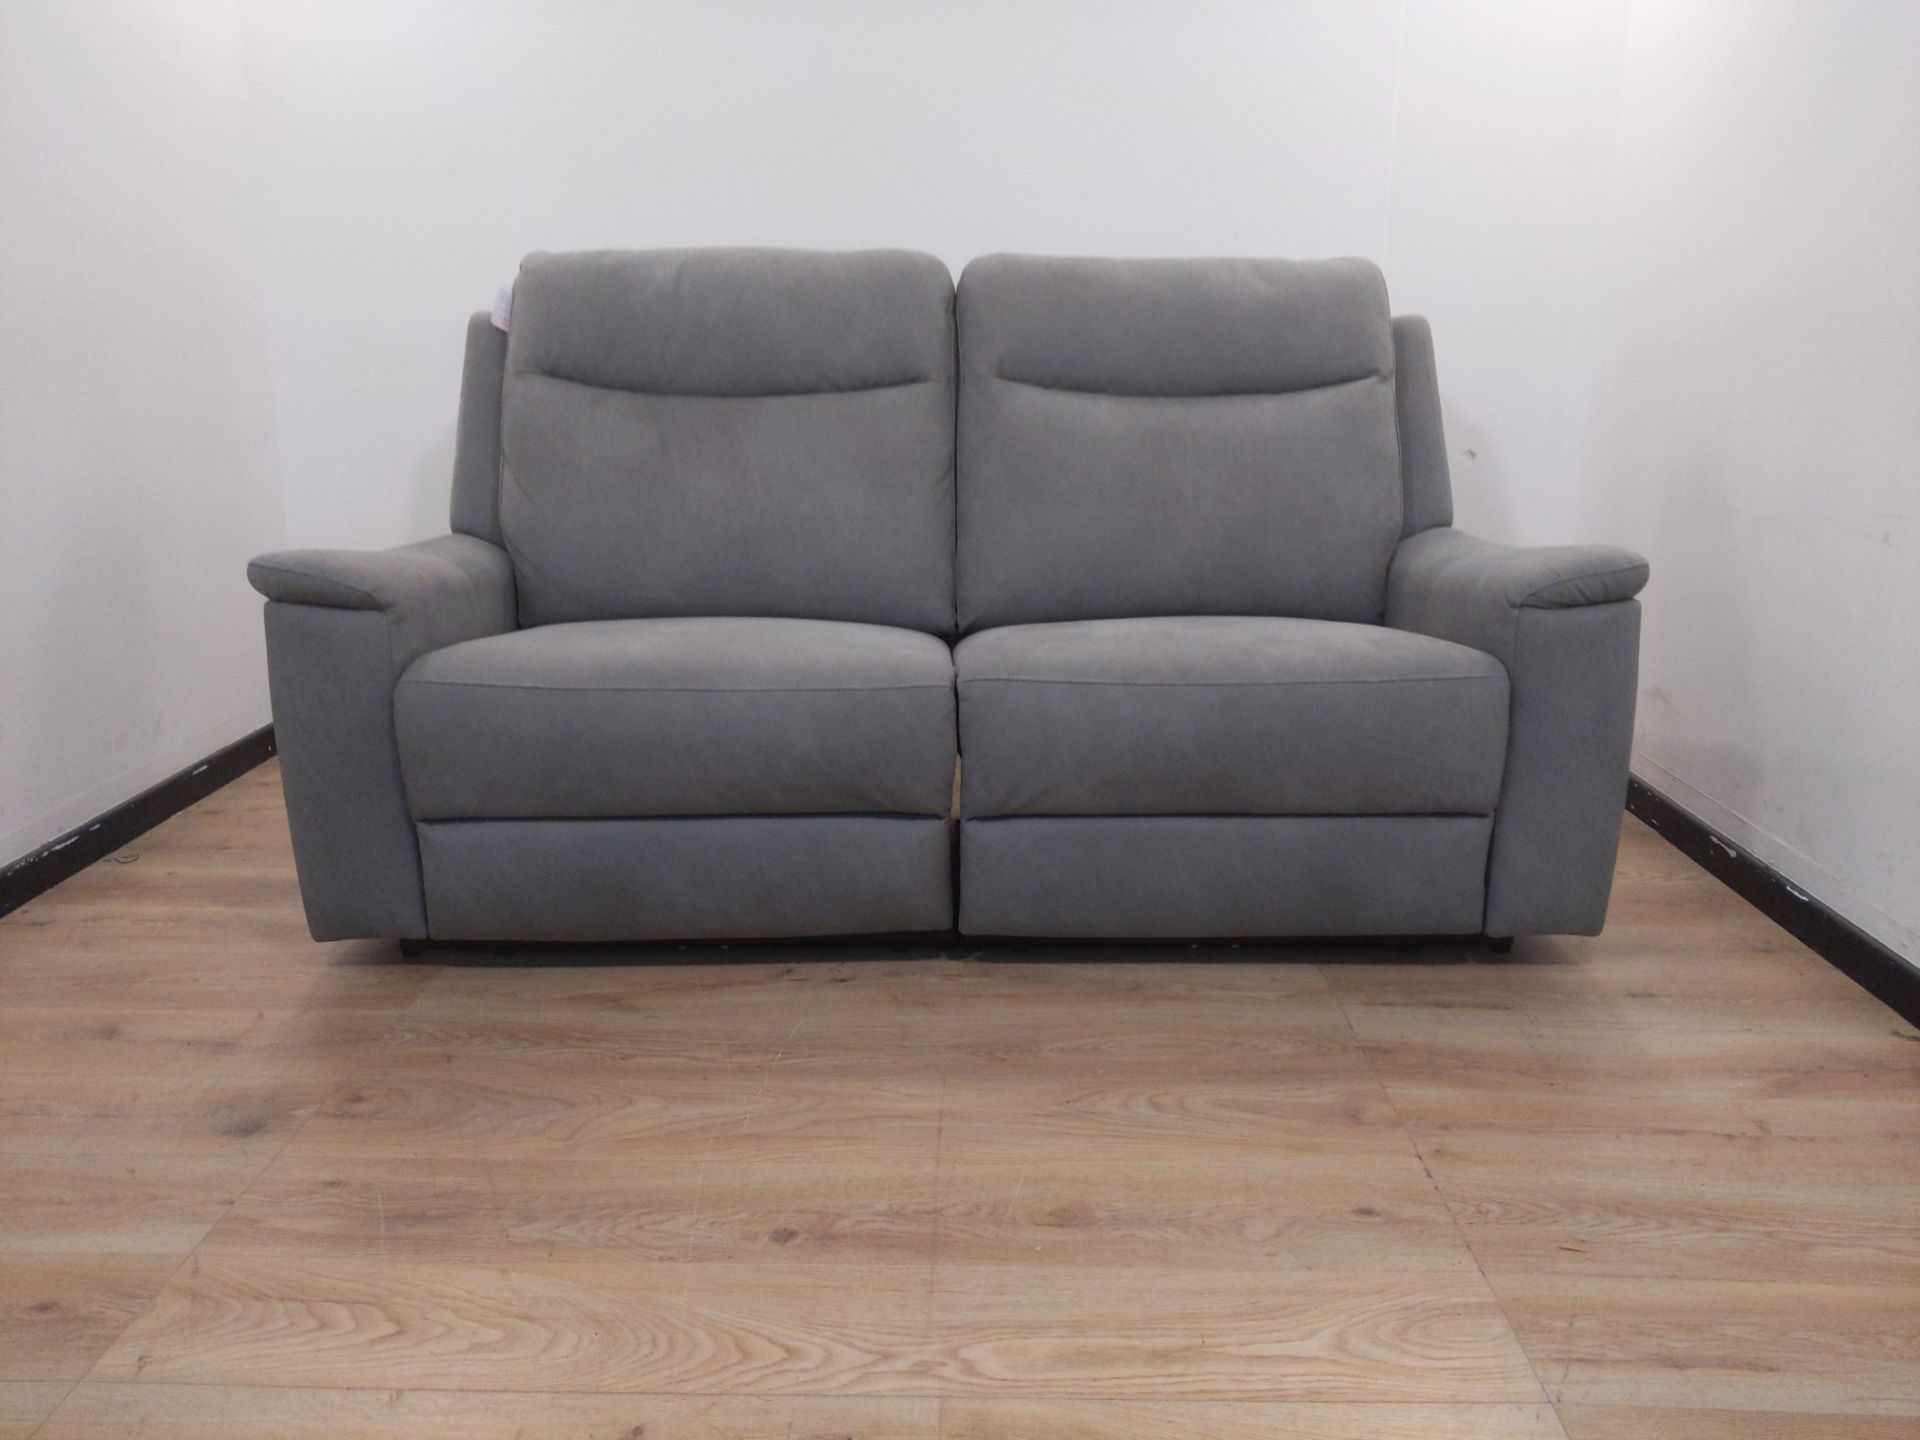 Morgan 3 Seater Power Recliner Grey Kuka Black Plastic Feet Kuka RRP 899 About the Product(s)